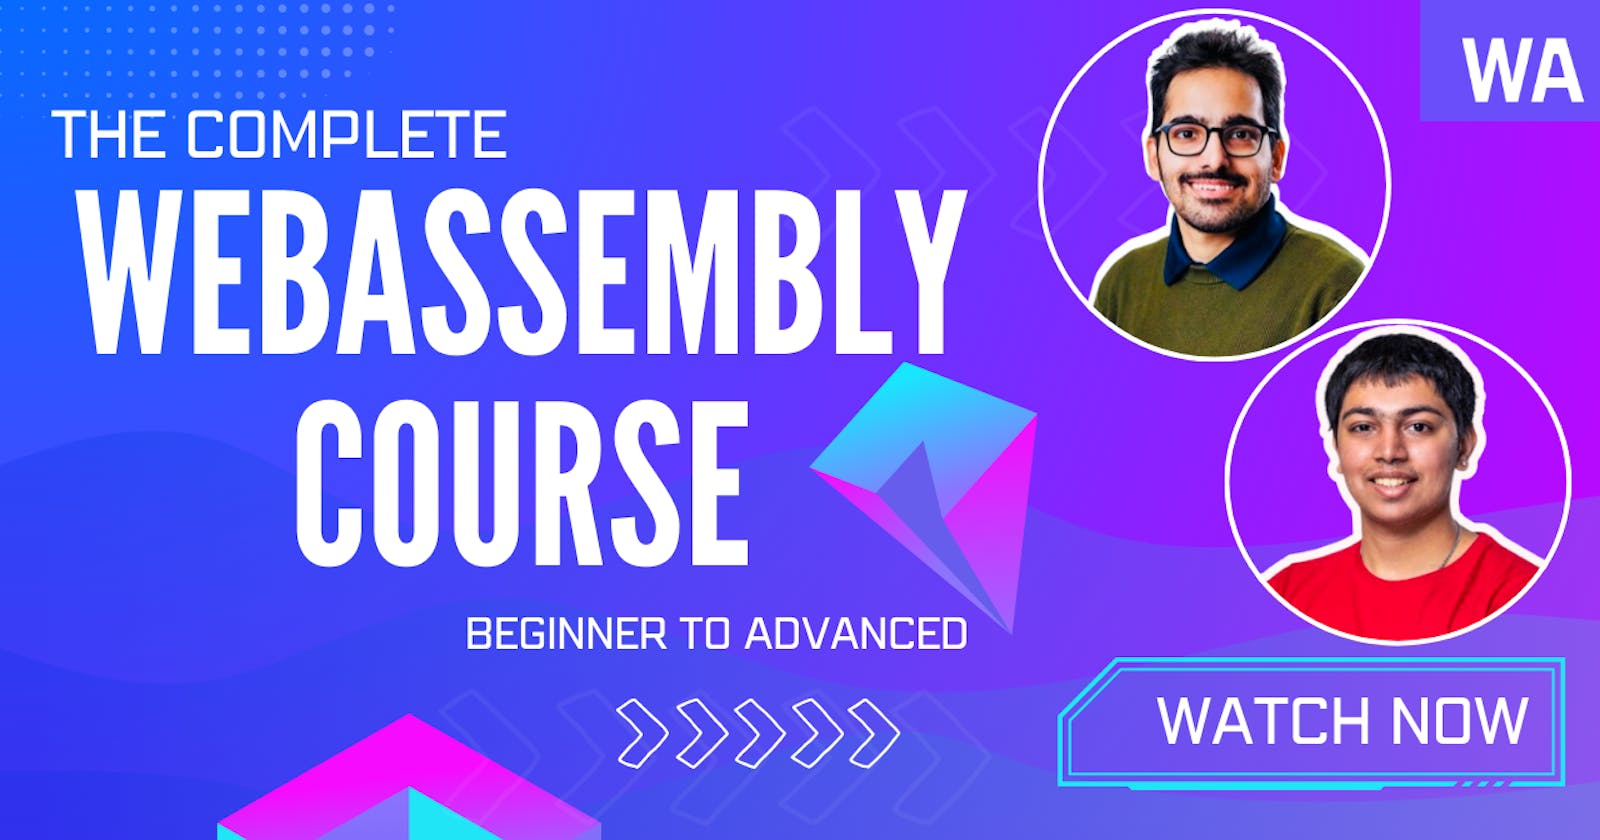 The WebAssembly Course